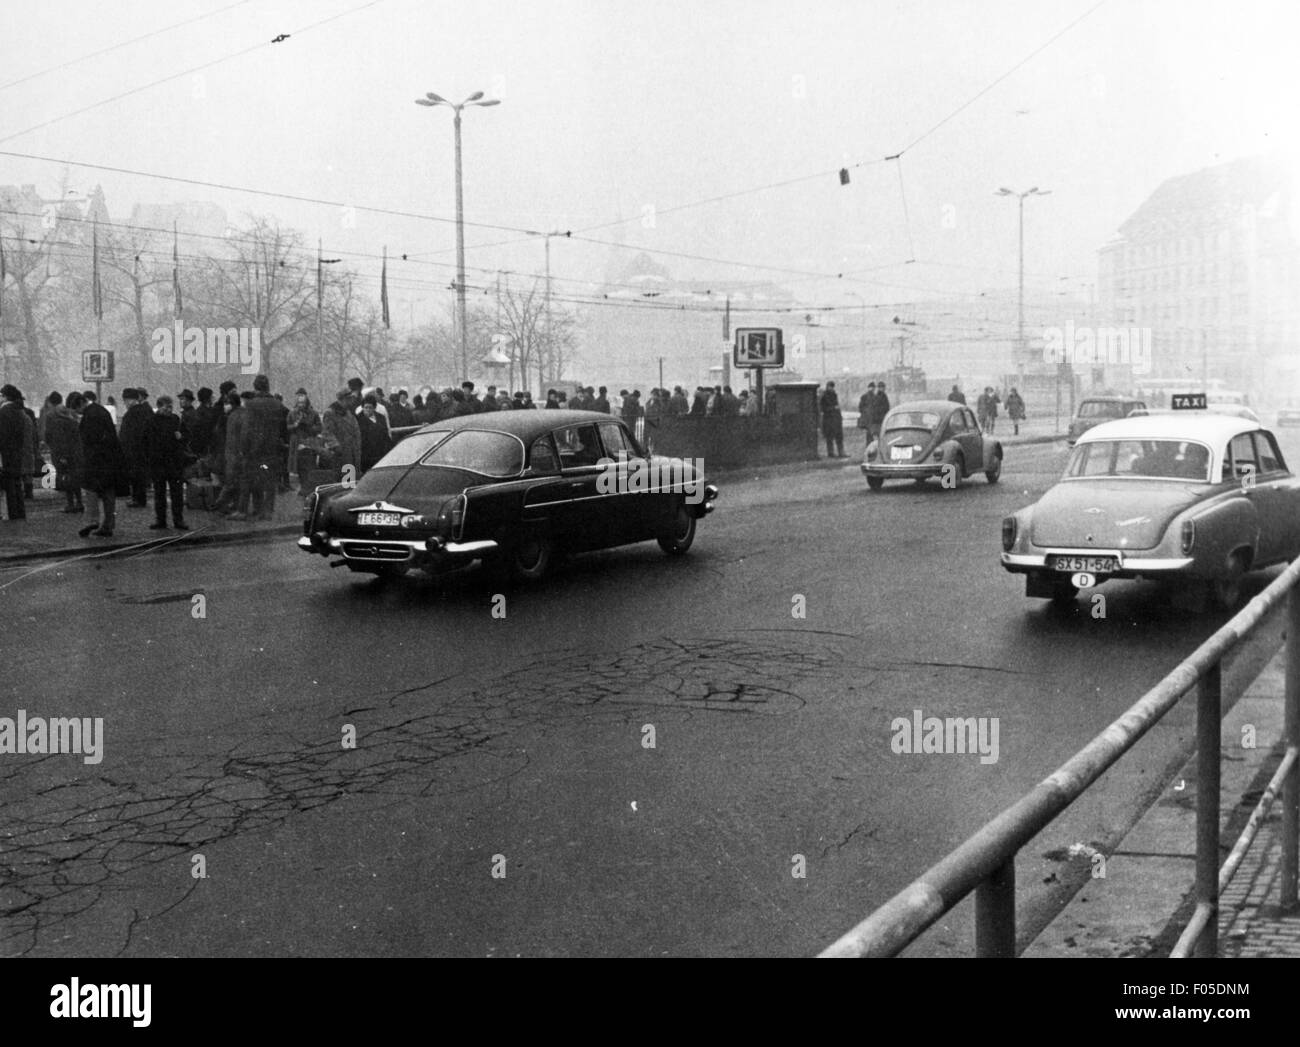 Germany, Leipzig, squares, Platz der Republik (Willy-Brandt-Platz), March 1970, Willy Brandt square, transport, transportation, cars, car, Skoda 1201, Volkswagen, VW beetle, Wartburg 312, taxi, taxicab, cab, taxicabs, cabs, central station, main station, main-station, main stations, main-stations, central stations, central terminal, central terminals, road traffic, crowd, crowds, crowds of people, 1970s, 70s, 20th century, East-Germany, GDR, DDR, East Germany, Eastern Germany, Saxony, Central Europe, squares, square, historic, historical, Additional-Rights-Clearences-Not Available Stock Photo